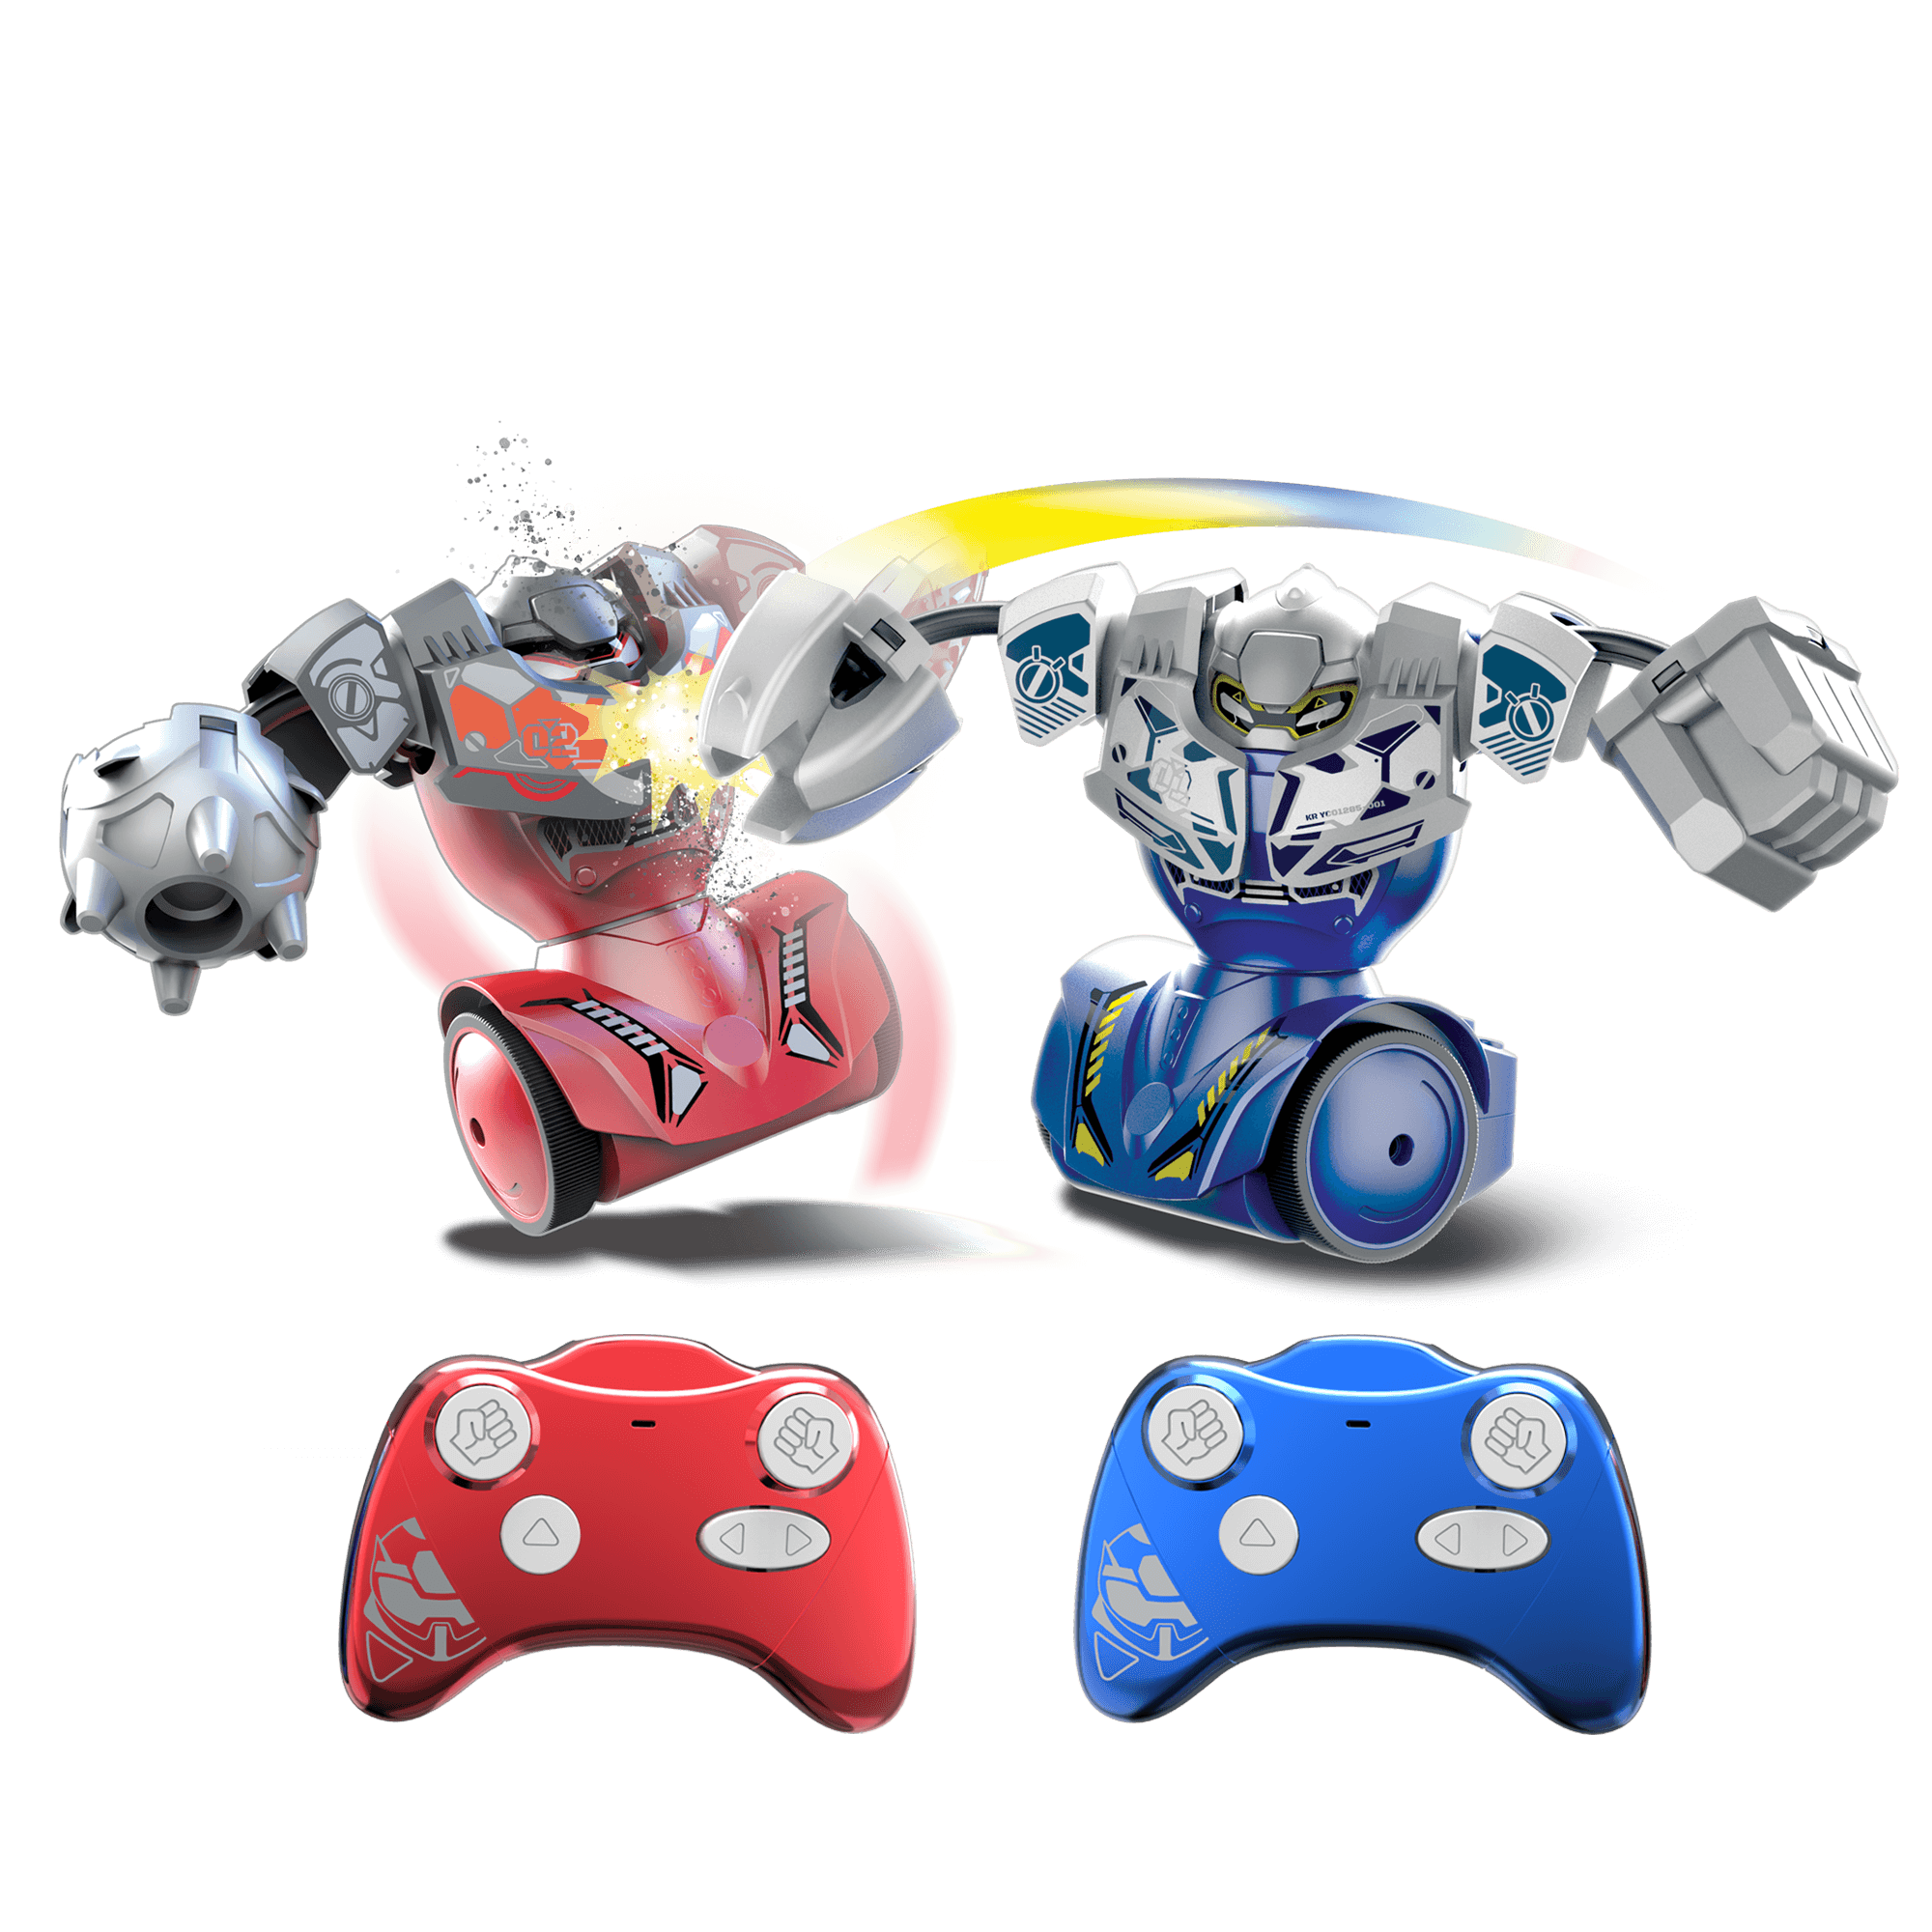 Silverlit Ycoo Robo Kombat Remote Control Battling Robots For Ages 5+